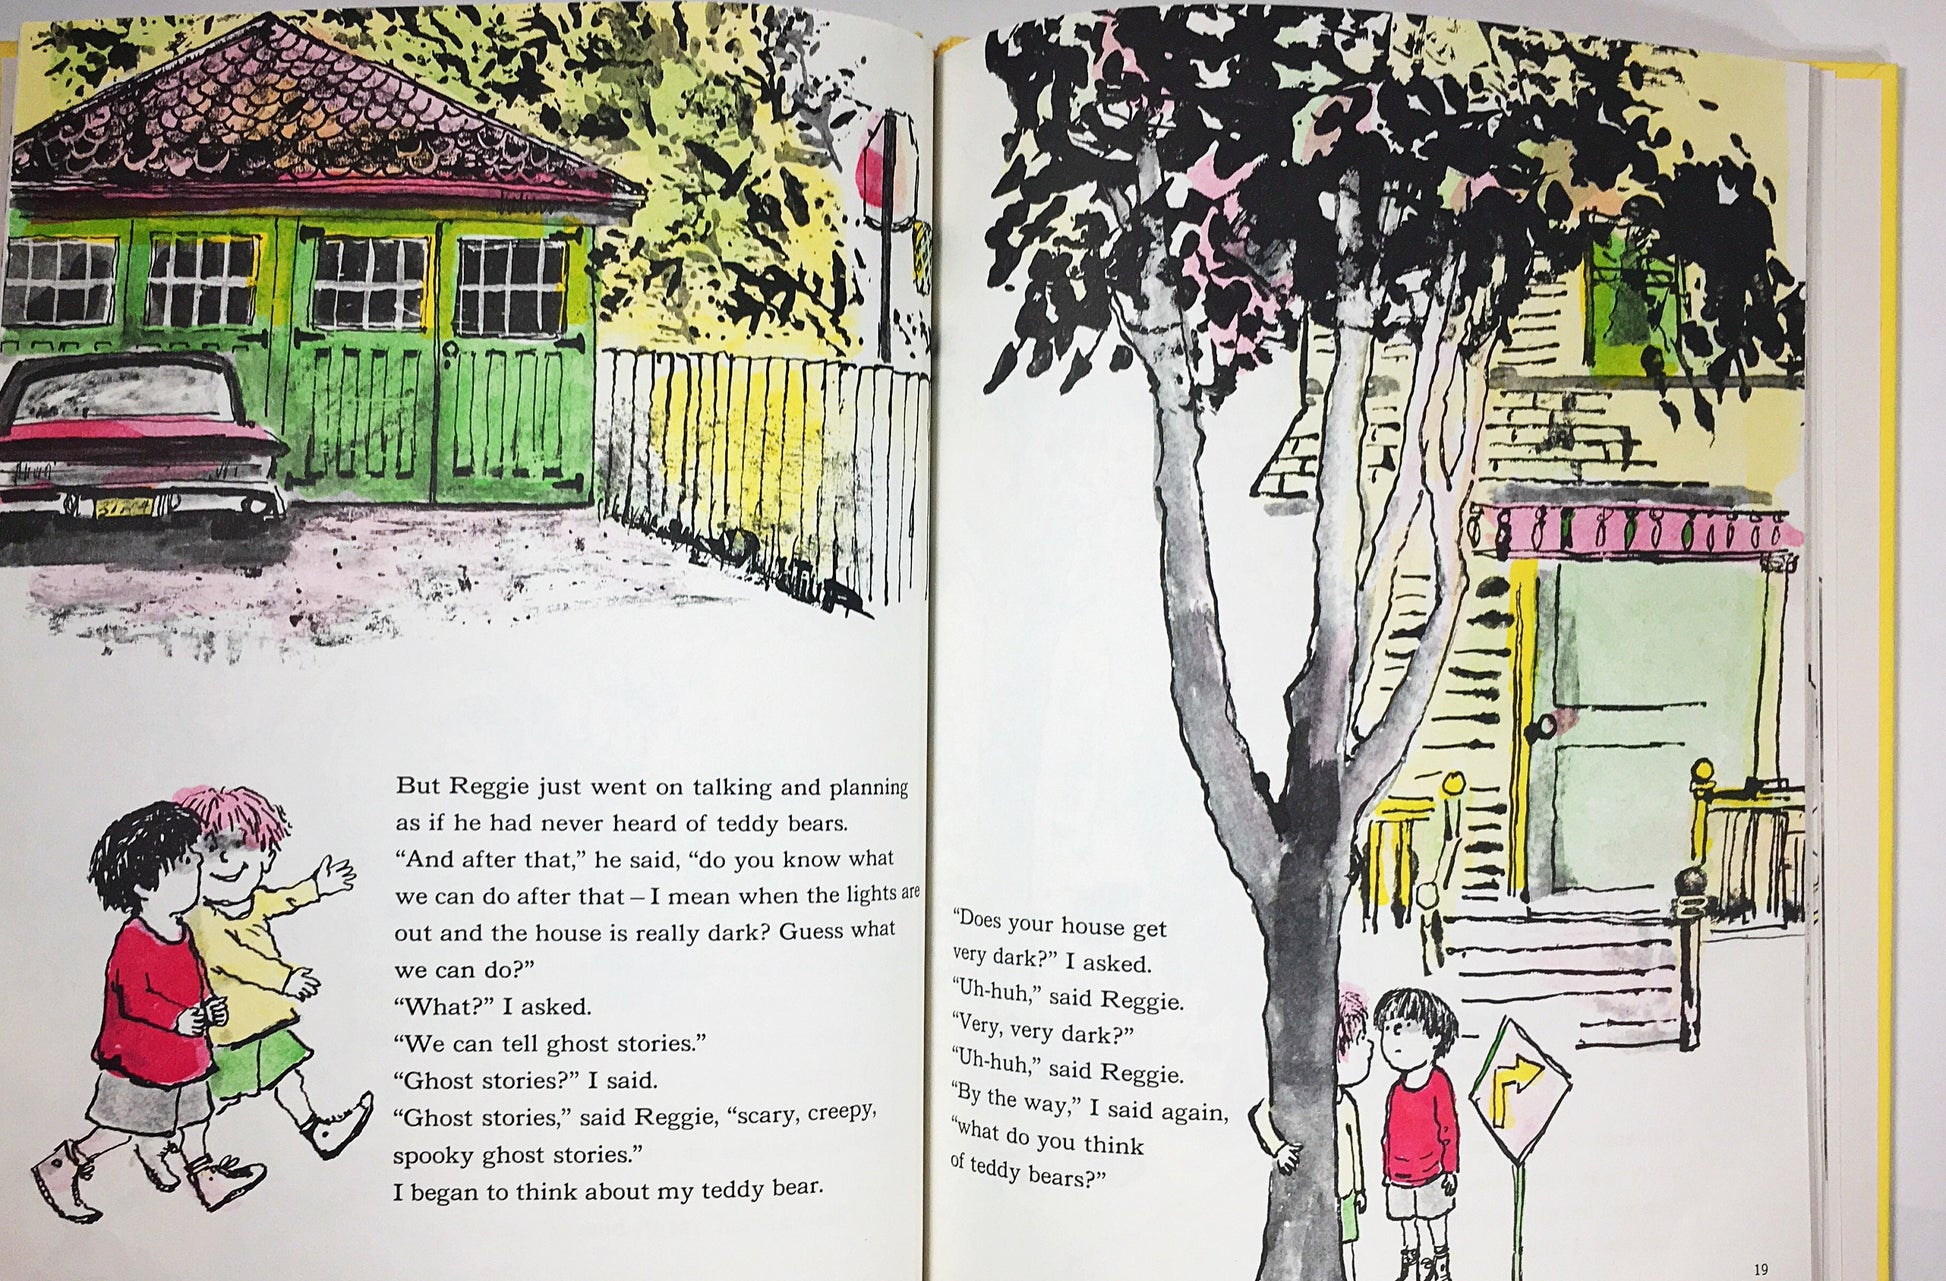 Ira Sleeps Over by Bernard Waber Vintage children's book circa 1972 about spending the night at a friend's without teddy bear. Yellow decor